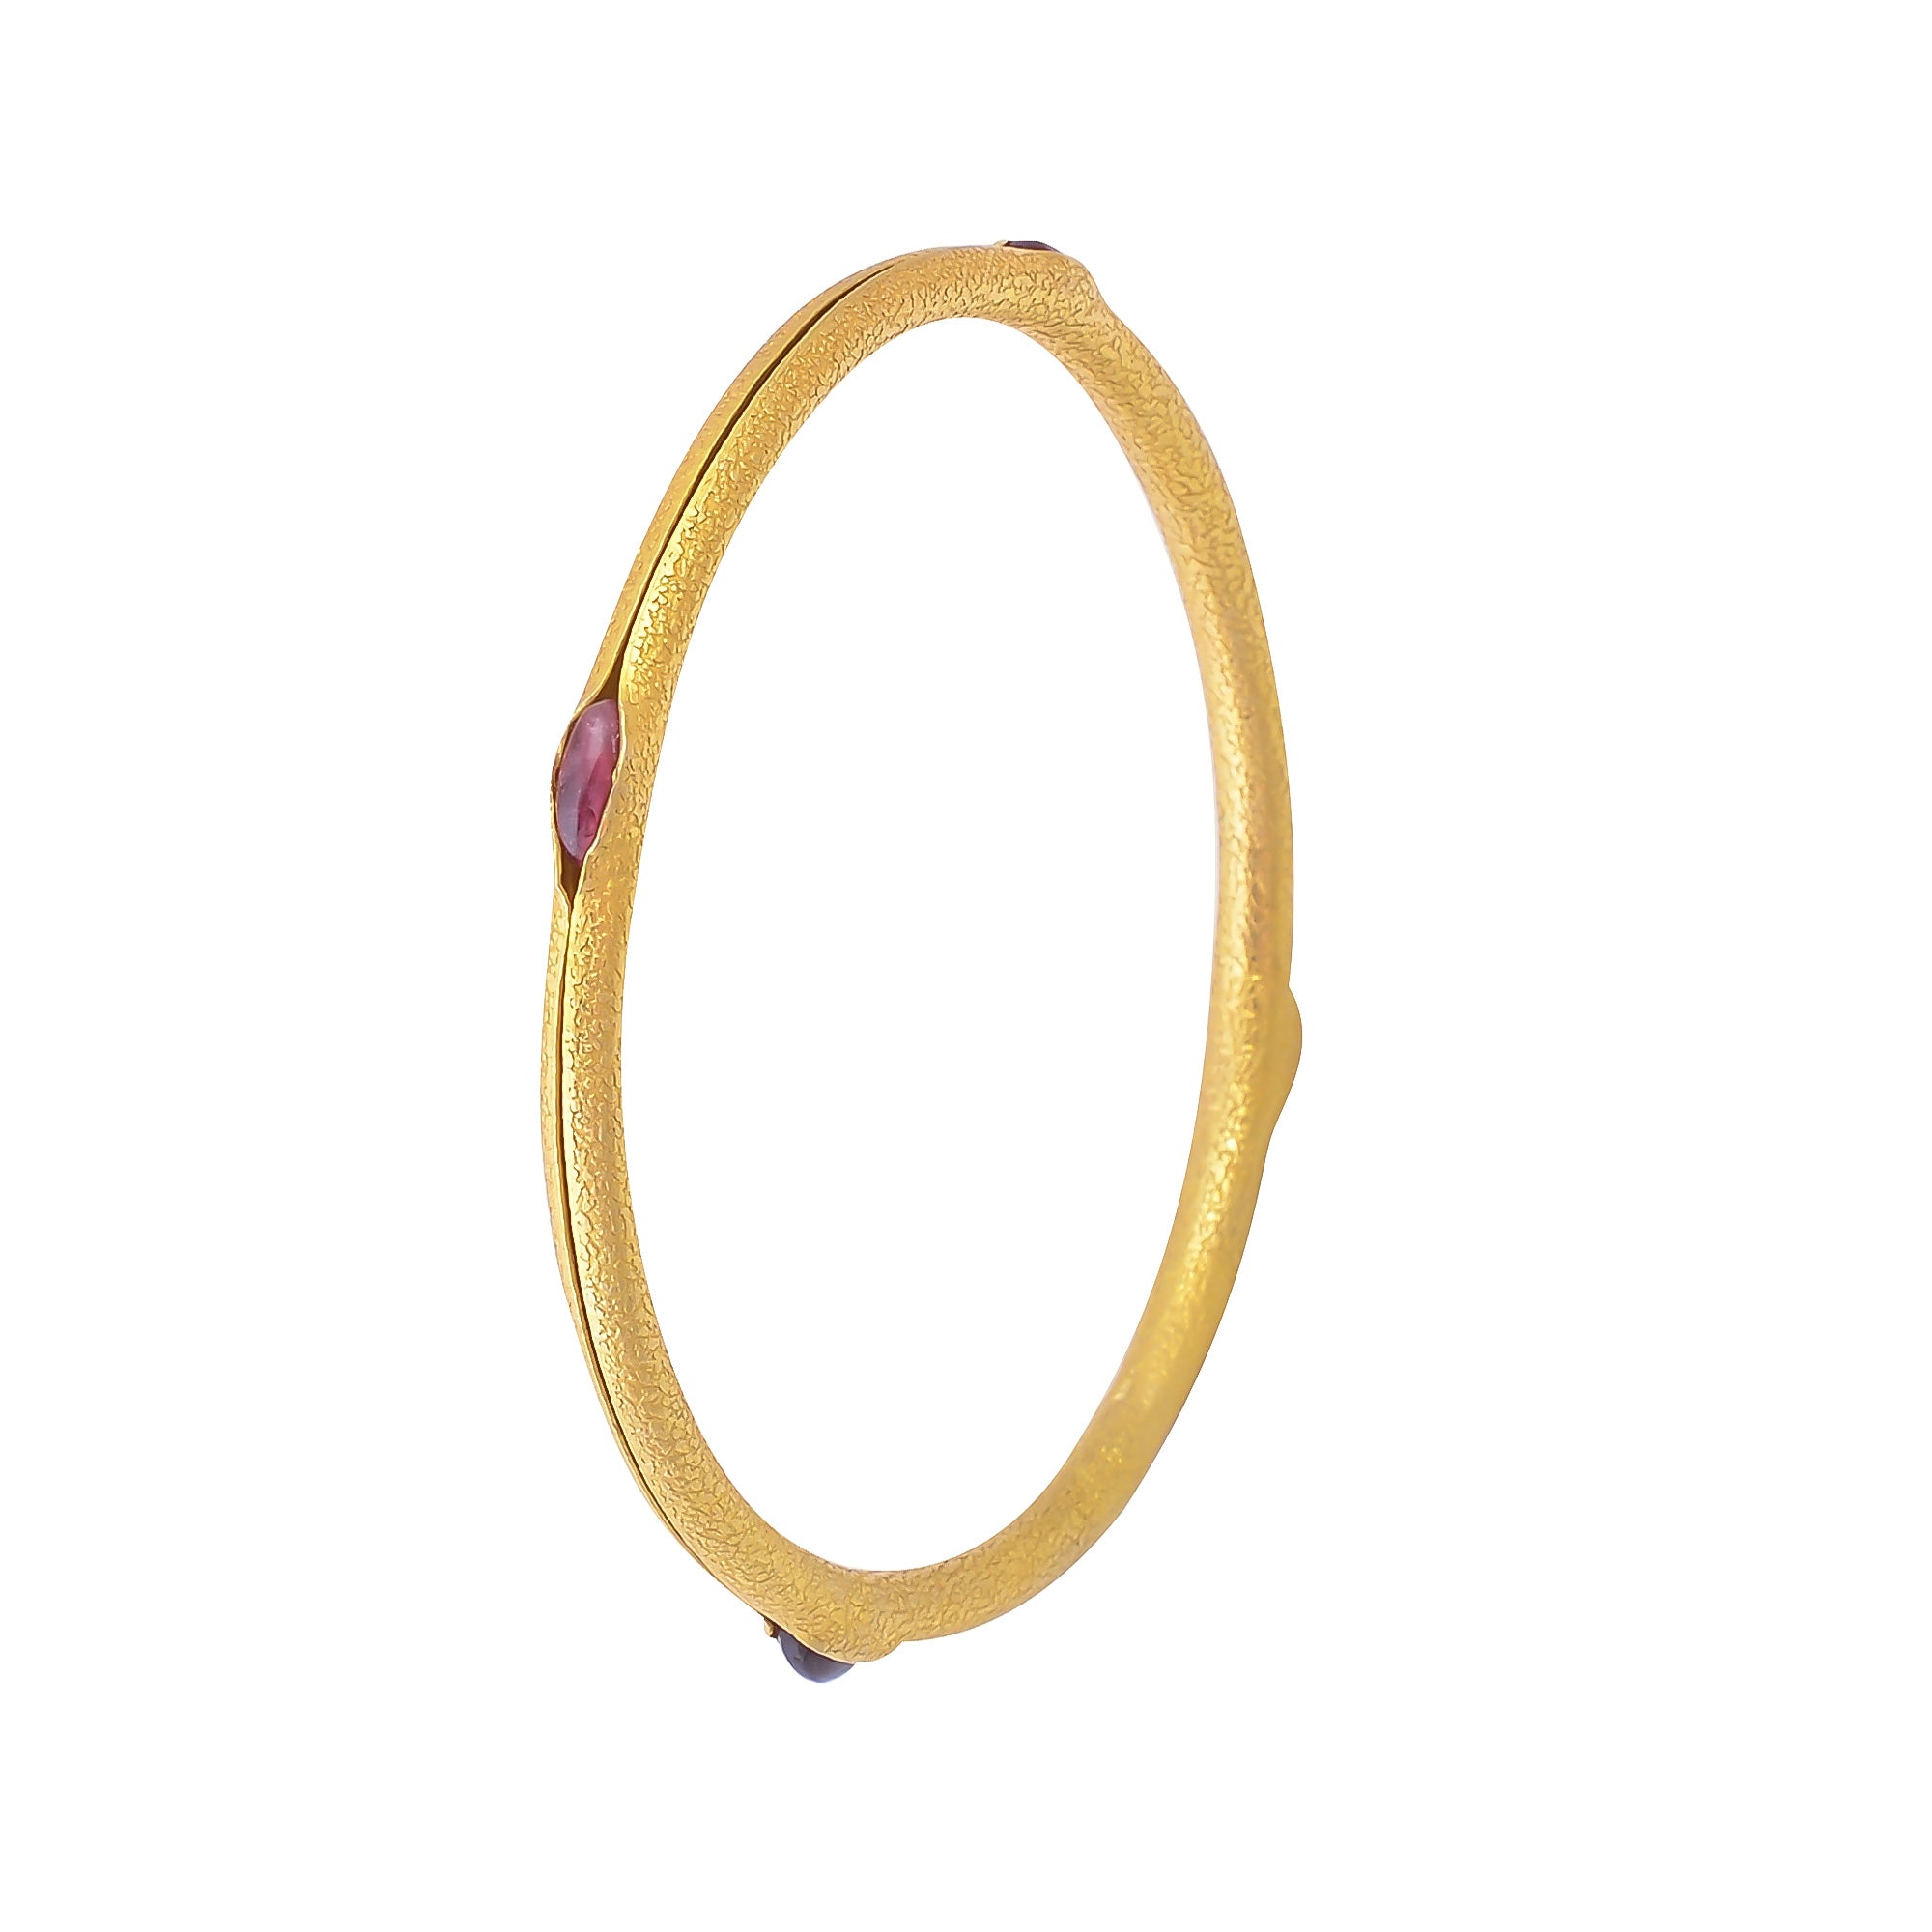 Buy Handcrafted Silver Gold Plated Pink Tourmaline Hollow Pipe Bangle